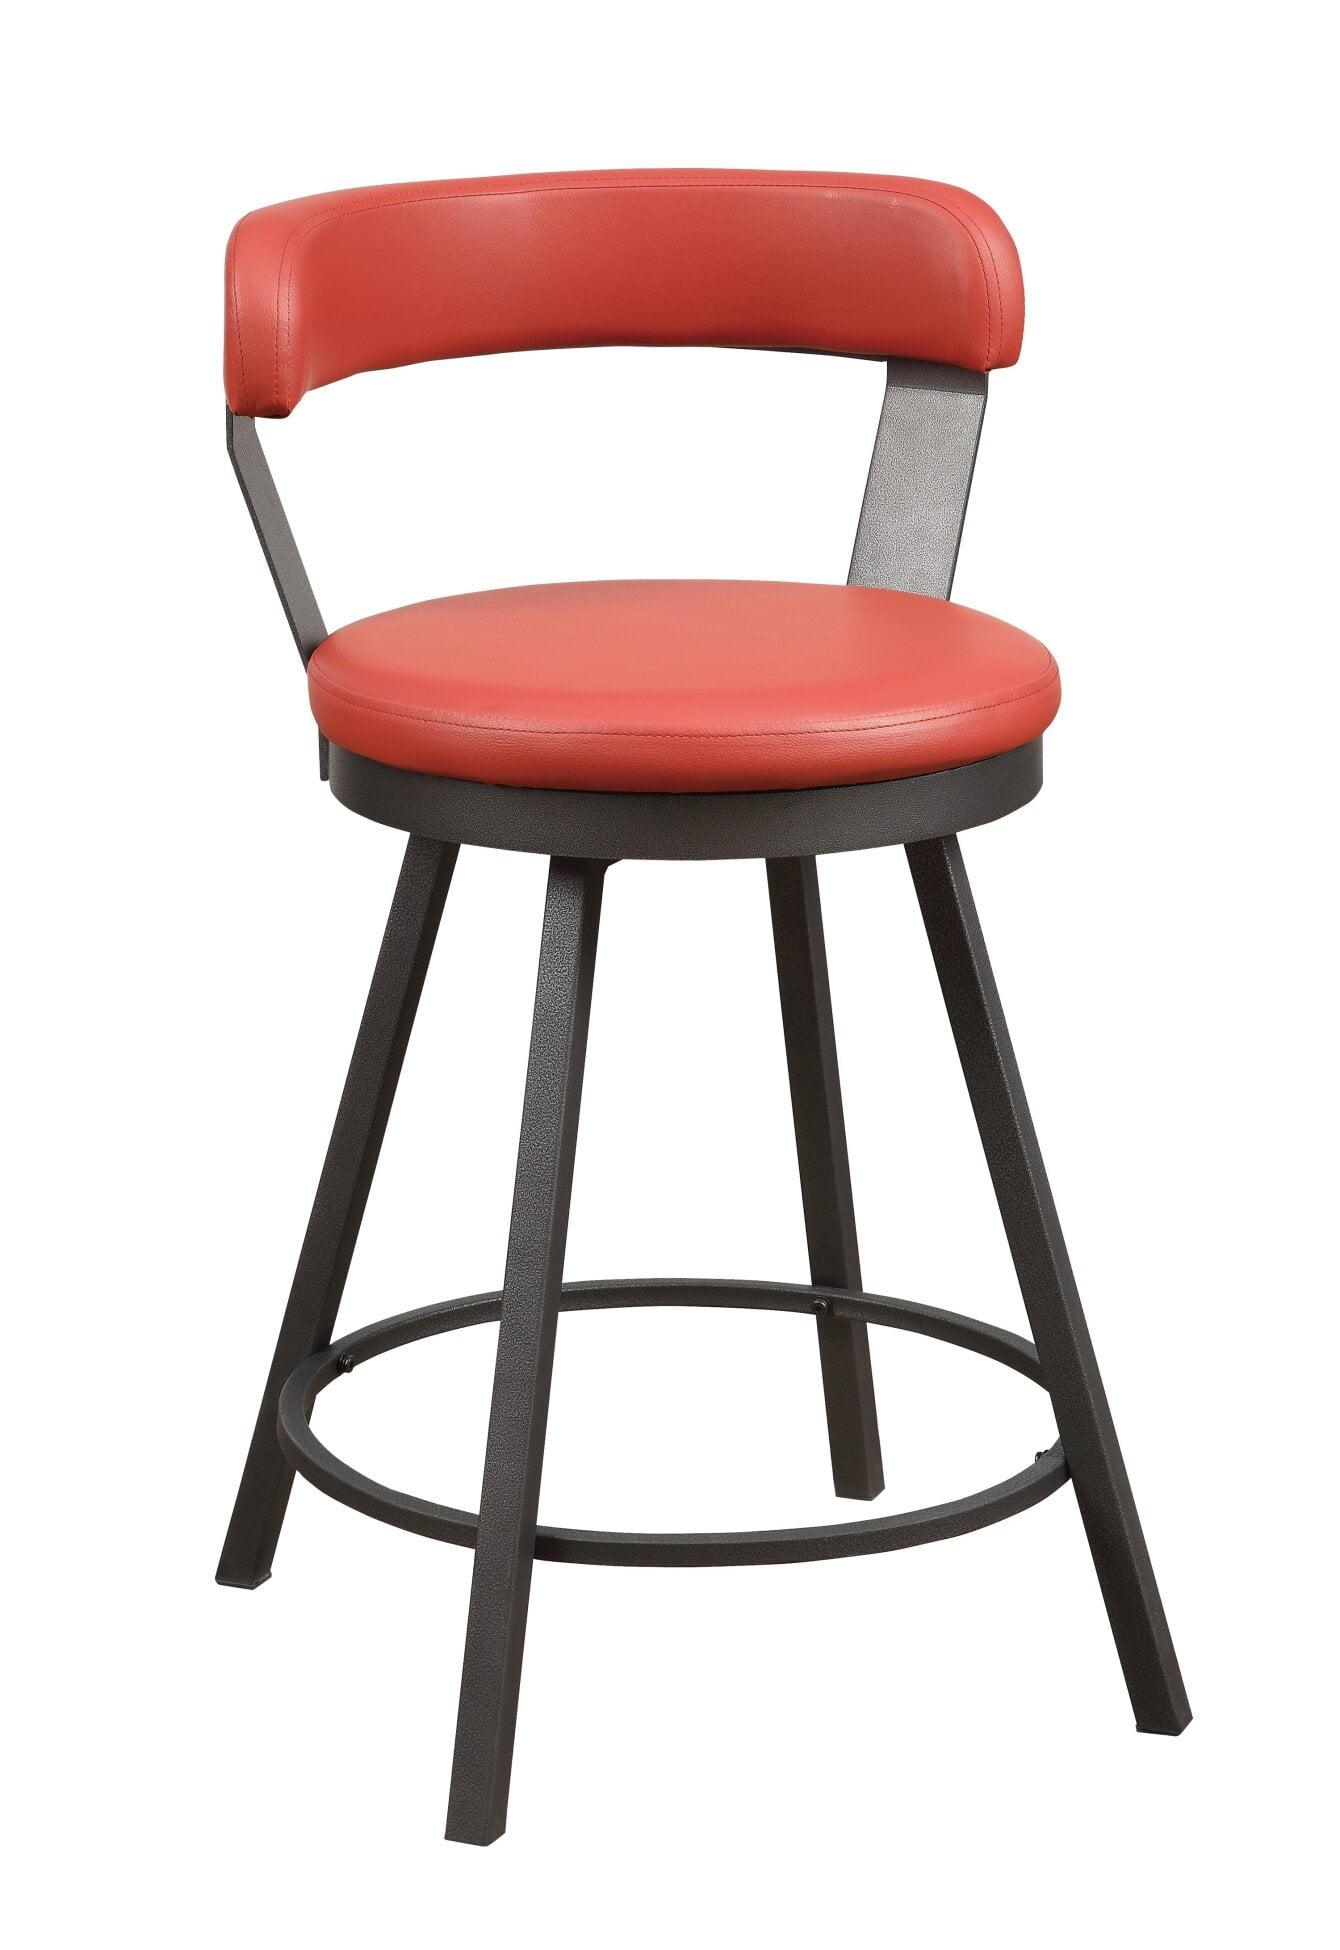 Swivel 24-Inch Red Leather Counter Height Bar Stools with Metal Base - Set of 2